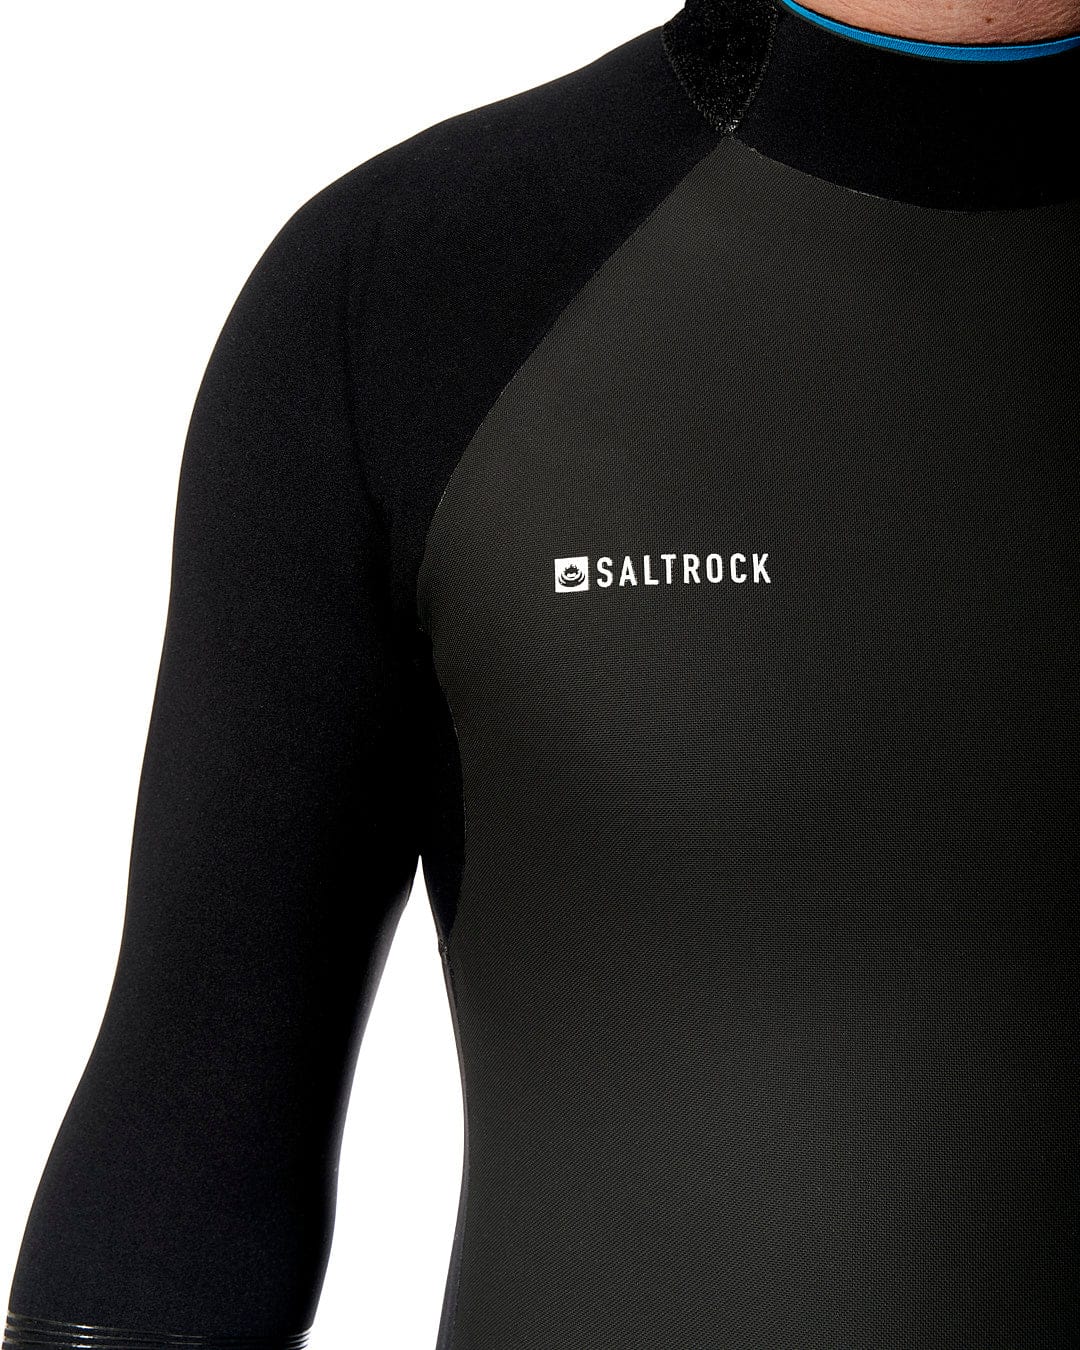 A man wearing a Synthesis - Mens 4/3 Back Zip Full Wetsuit - Black with the brand Saltrock on it.